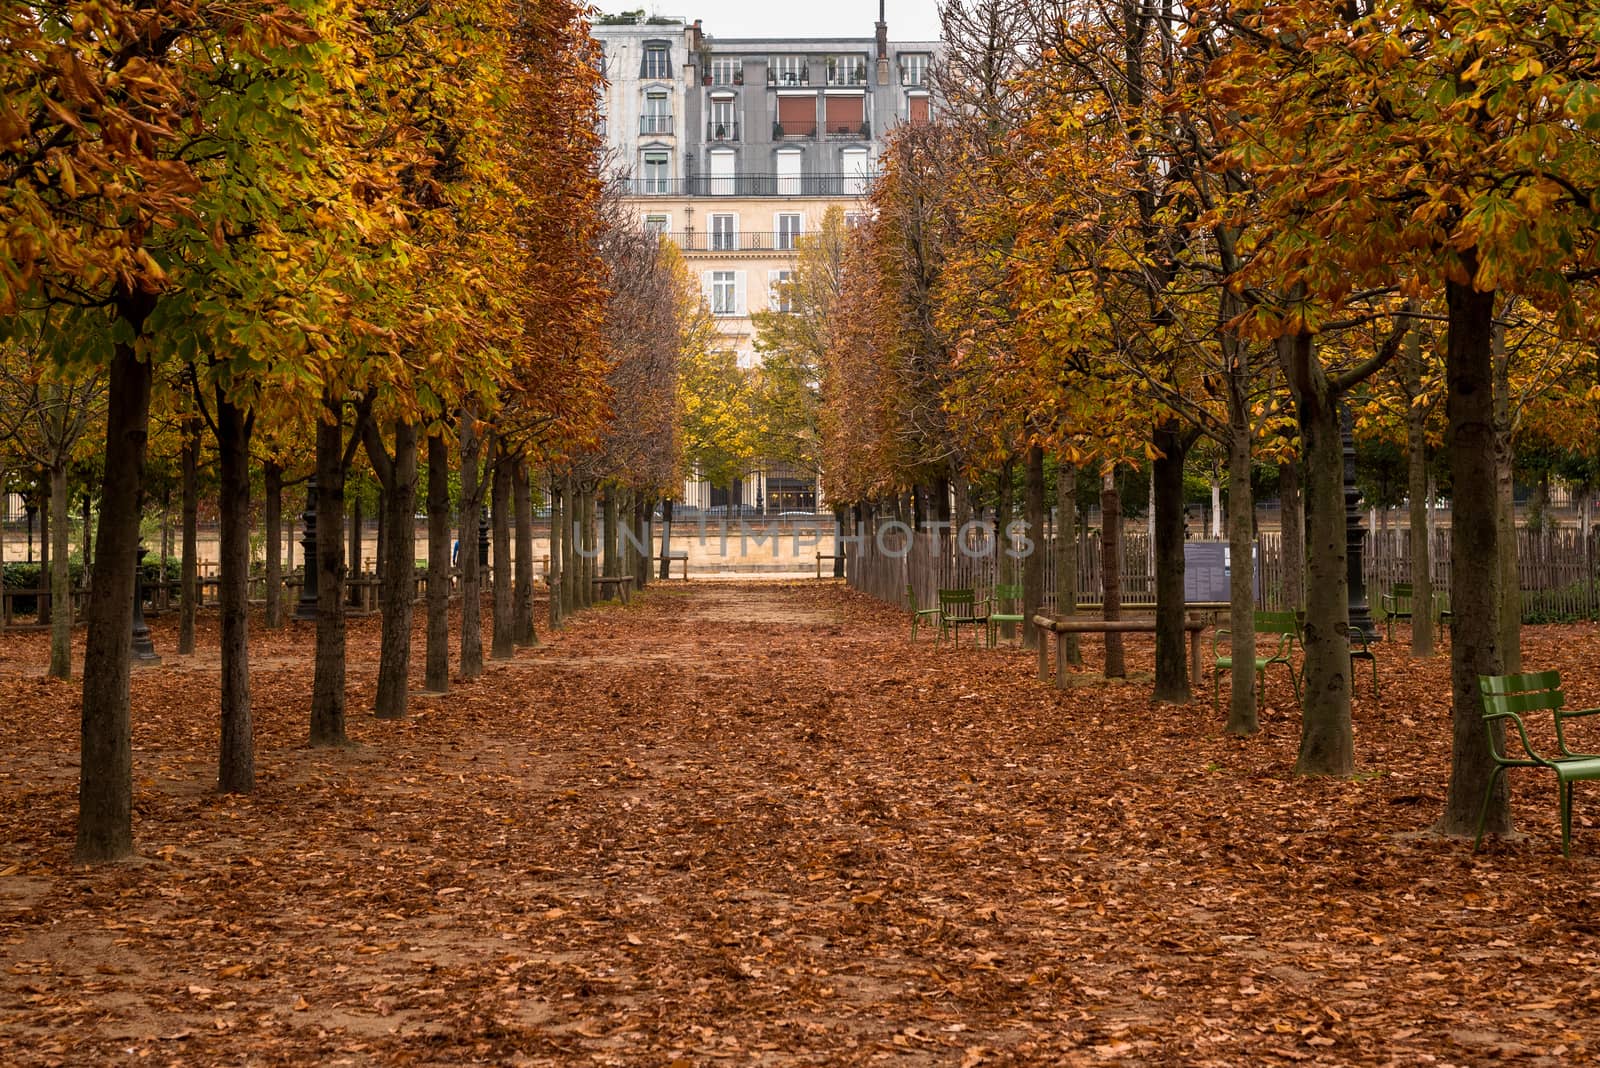 Pathway in the Tuileries Gardens by jfbenning